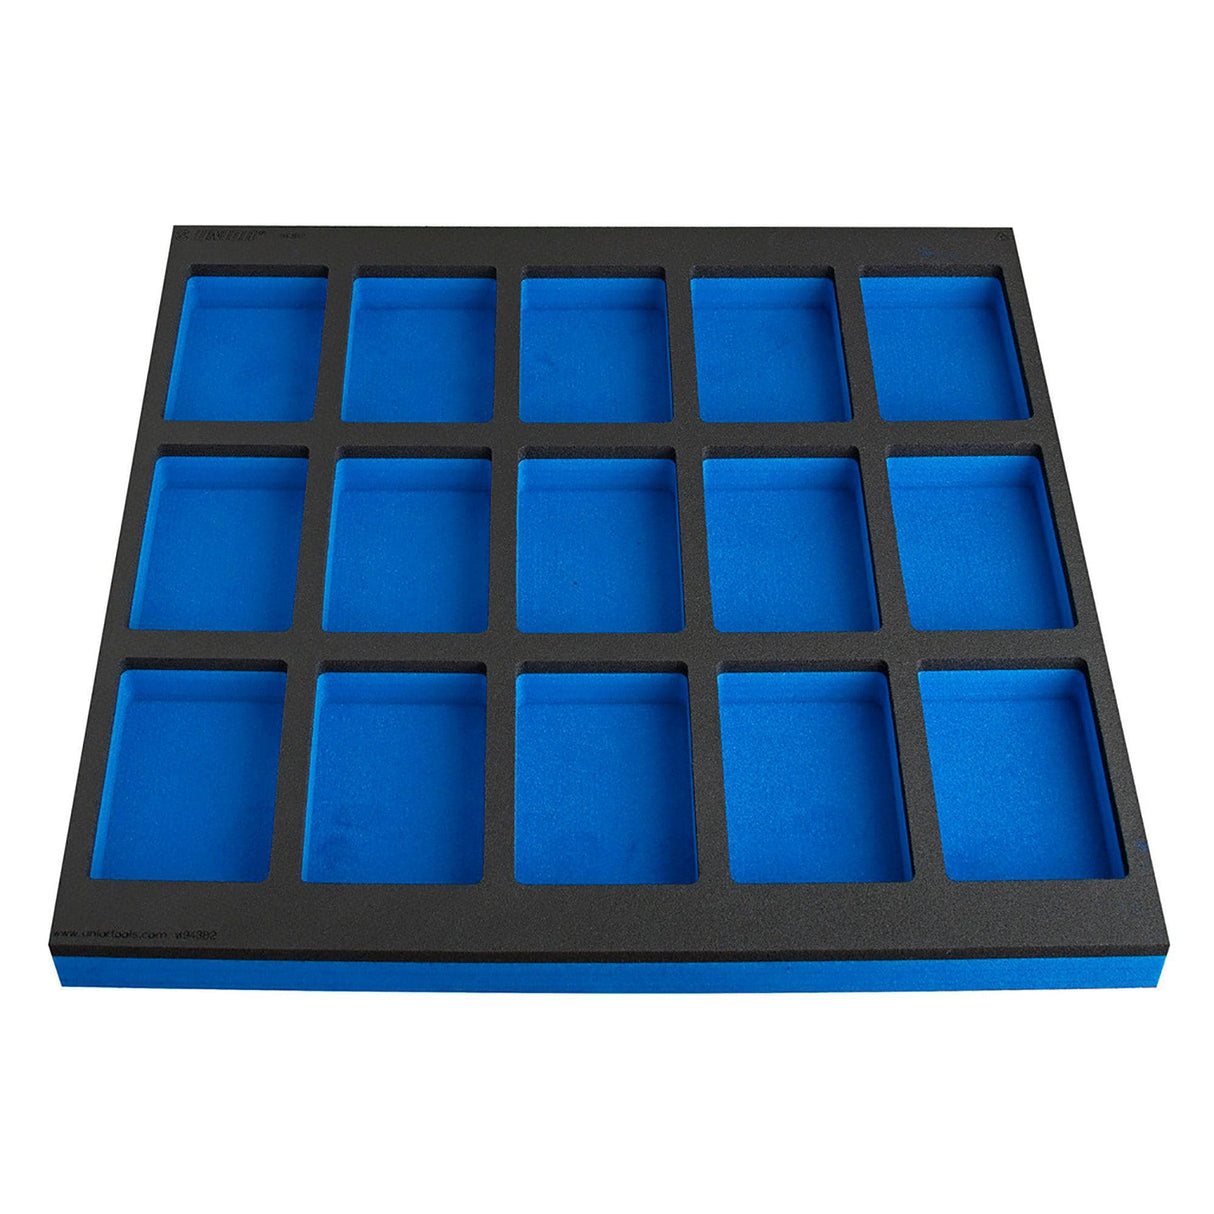 Unior Sos Tool Tray With Compartment For Work Bench Big Tool Chest (15 Compartments):  570 X 562Mm